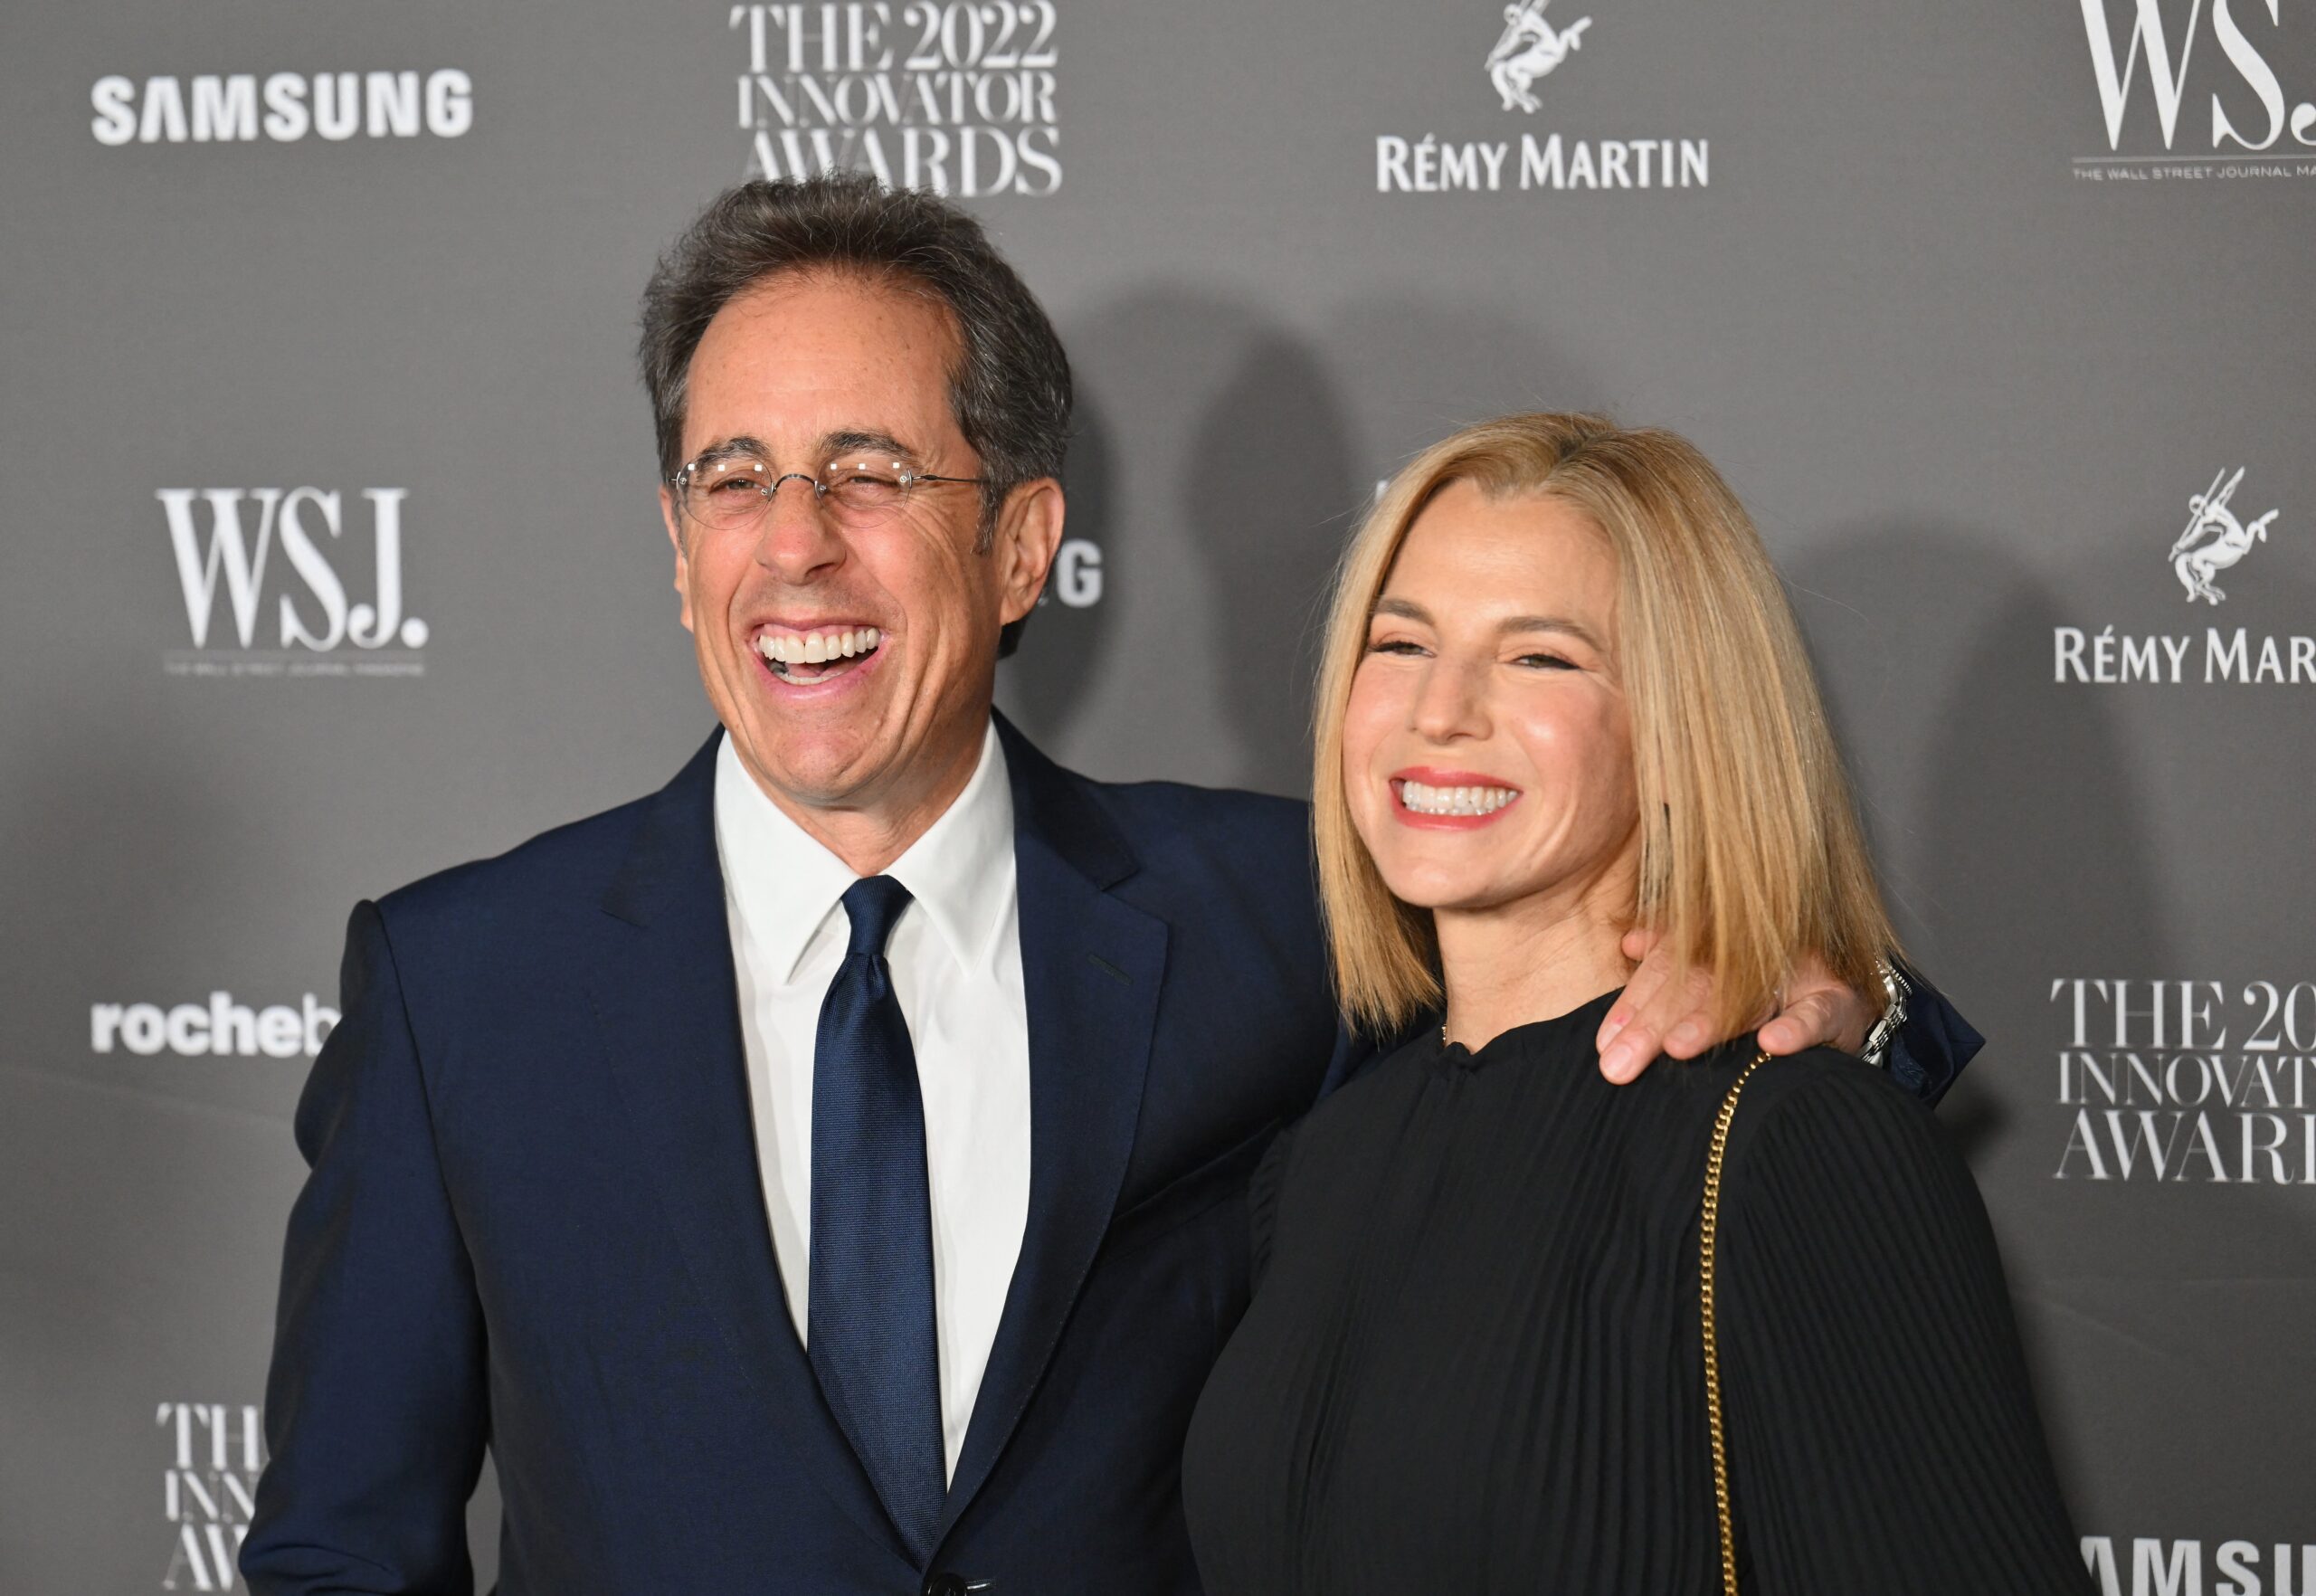 US actor Jerry Seinfeld (L) and Jessica Seinfeld arrive for the Wall Street Journal Magazine 2022 Innovator awards at the Museum of Modern Art (MoMA) in New York City on November 2, 2022.,Image: 735022067, License: Rights-managed, Restrictions: , Model Release: no, Credit line: ANGELA WEISS / AFP / Profimedia